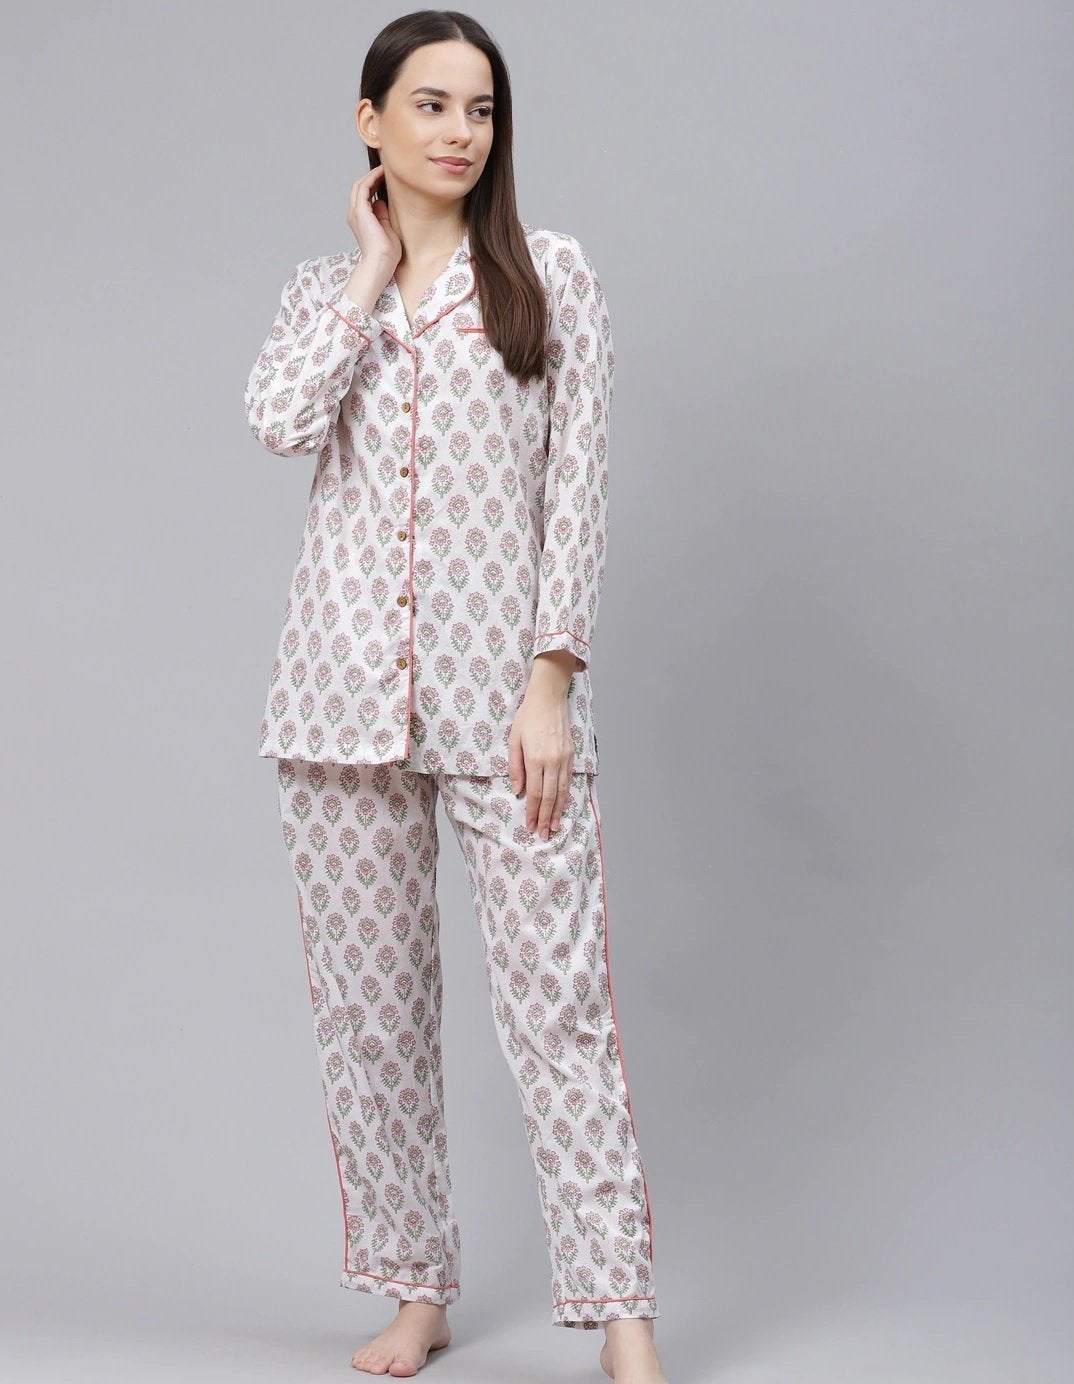 Women's The Dressify White Printed Cotton Night Suit - Divena